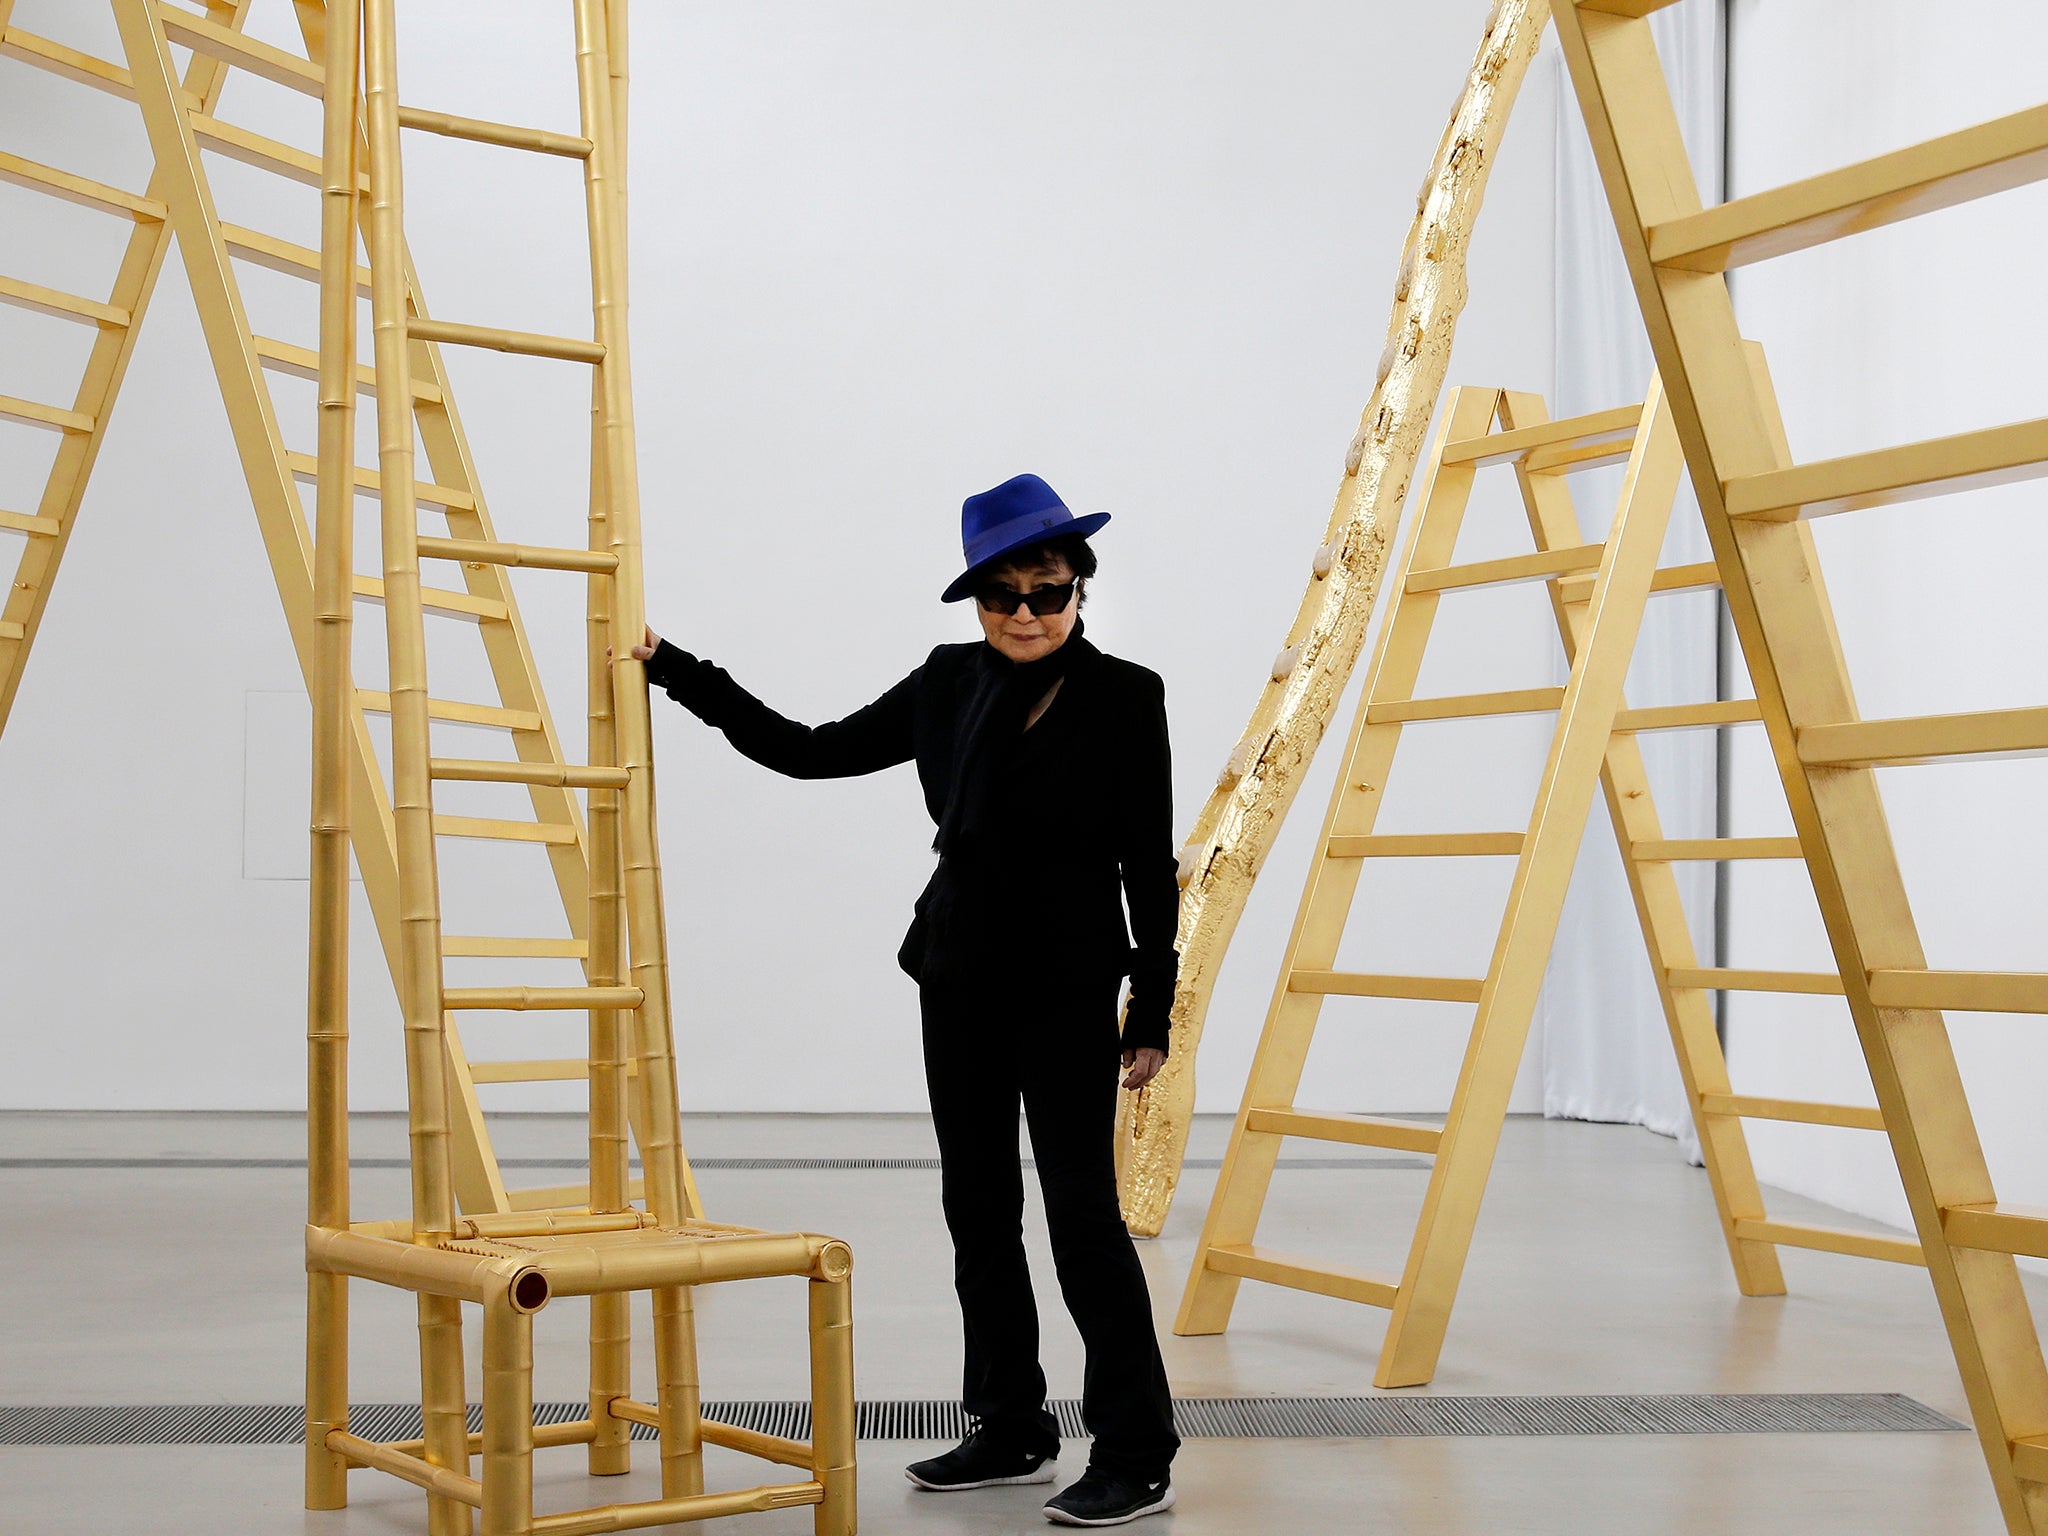 Yoko Ono poses with her art installation "Golden Ladders" on display at her exhibition held at the 798 art district in Beijing, China